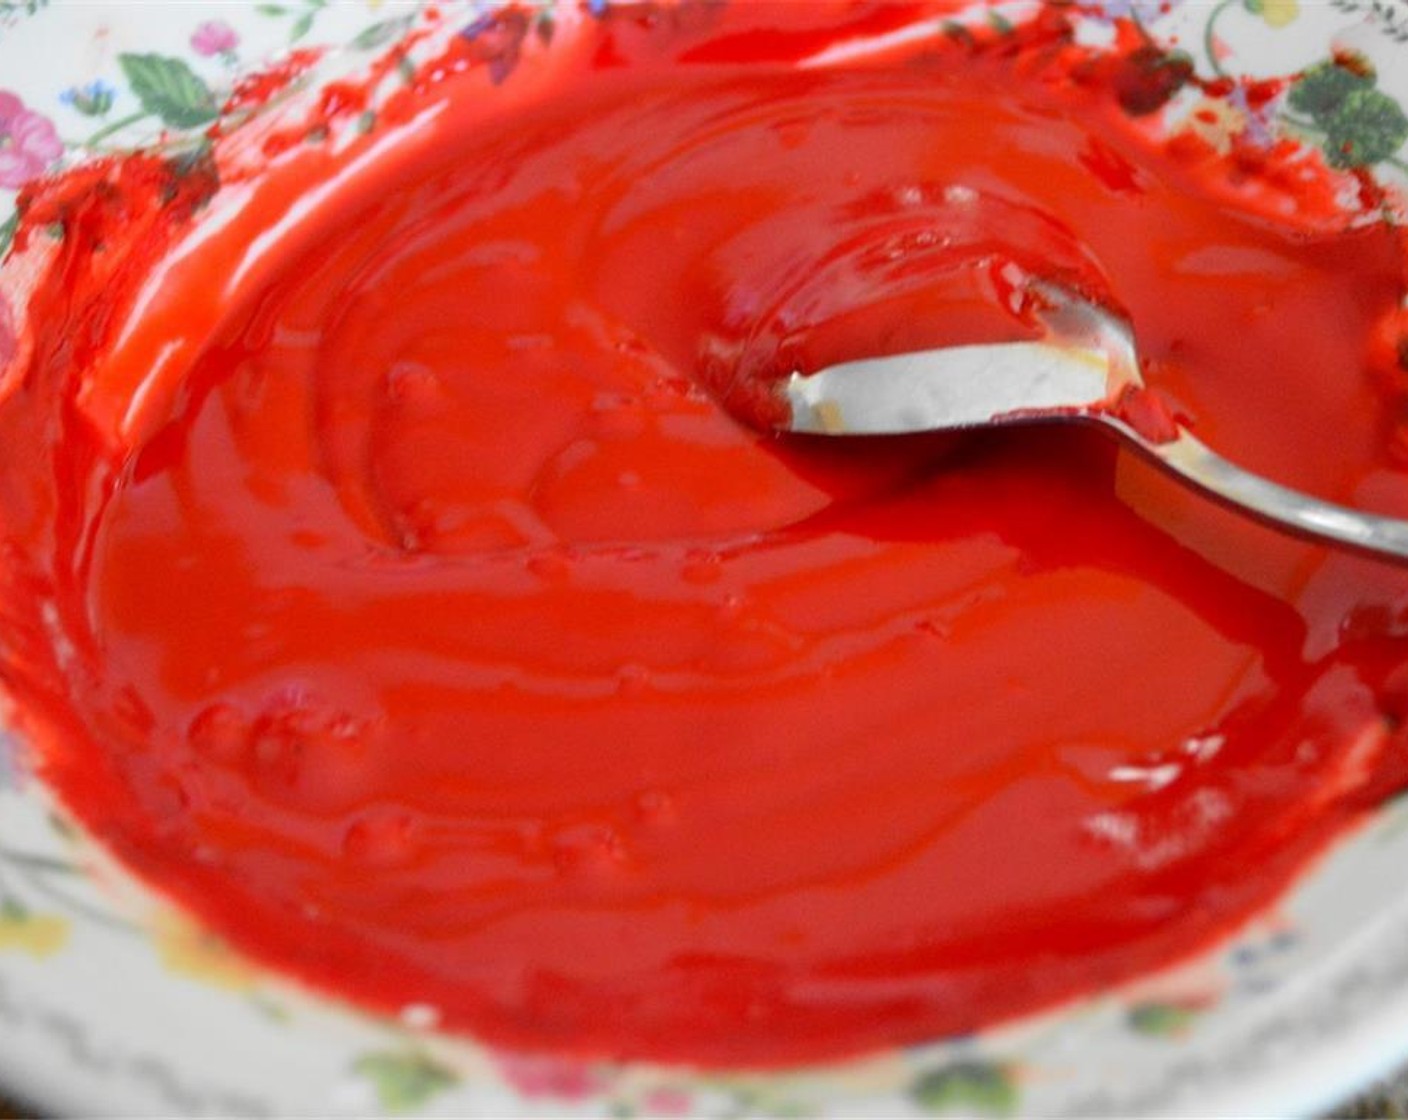 step 8 Prepare the glaze by stirring Powdered Confectioners Sugar (1 1/2 cups), Red Food Coloring (to taste), Rose Water (1 tsp), and Vanilla Extract (1 tsp) together until it becomes a thick frosting. Thin it out and make it glossy with dashes of filtered Water (2 dashes). Set the glaze aside.